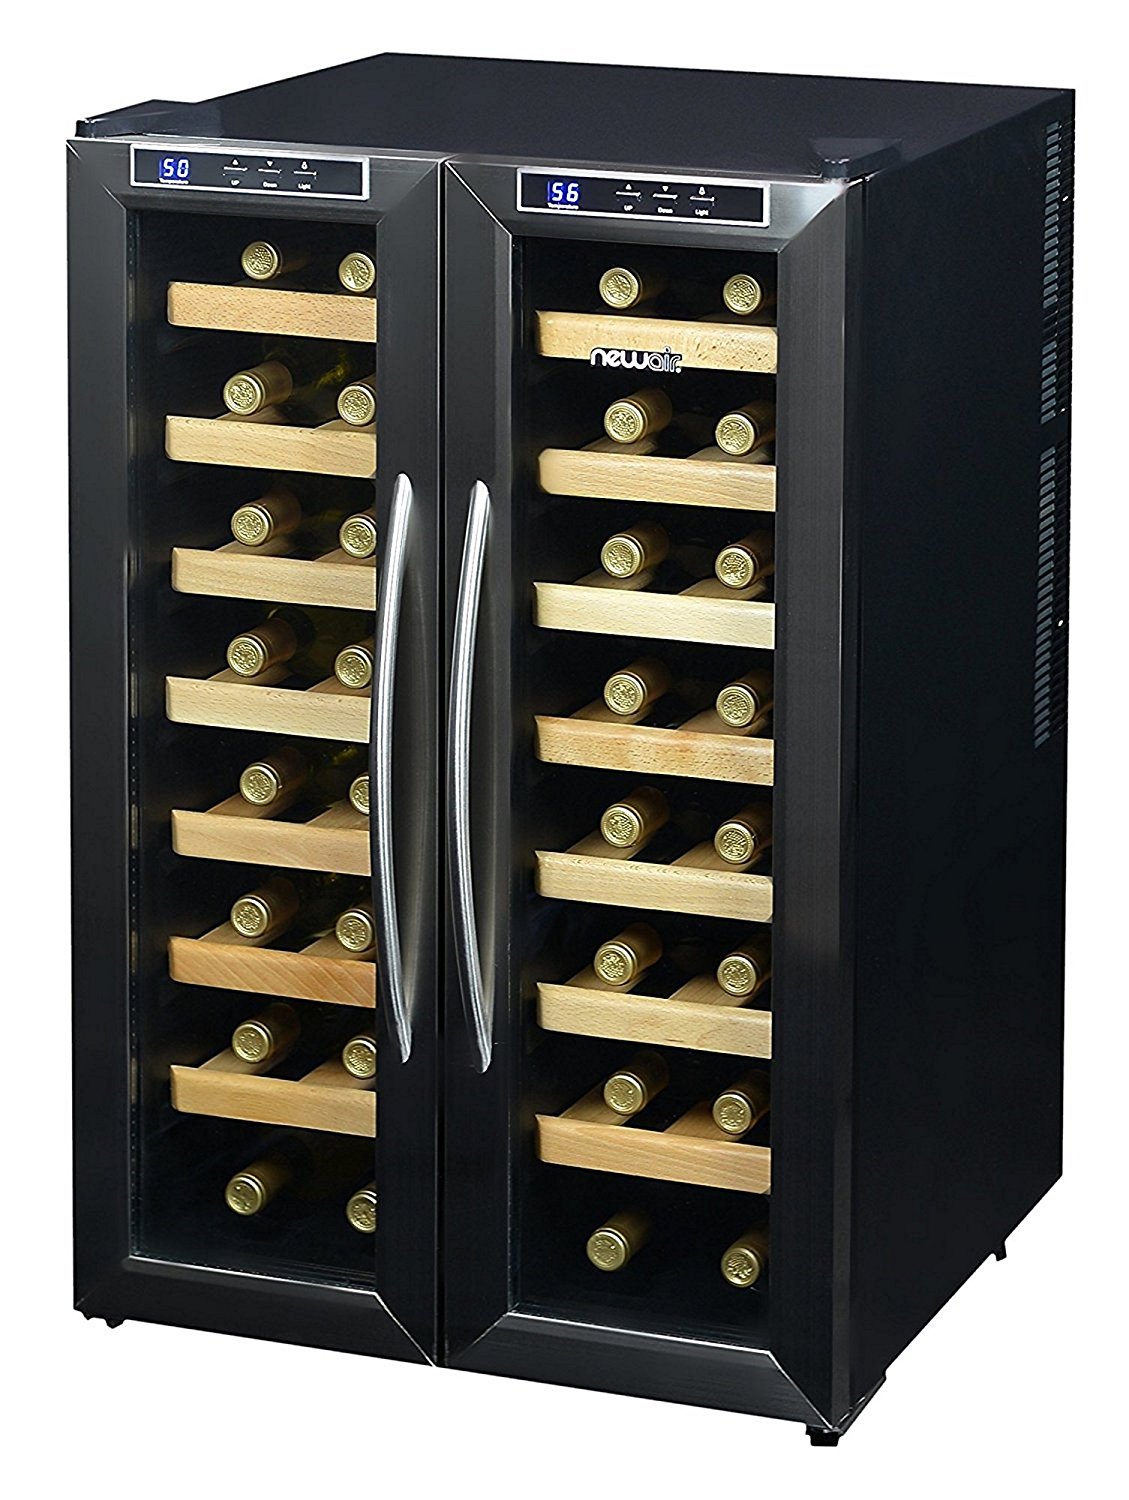 【NewAir】ワインクーラー ボトル32本 32 Bottle Dual Zone Thermoelectric Wine Refrigerator 